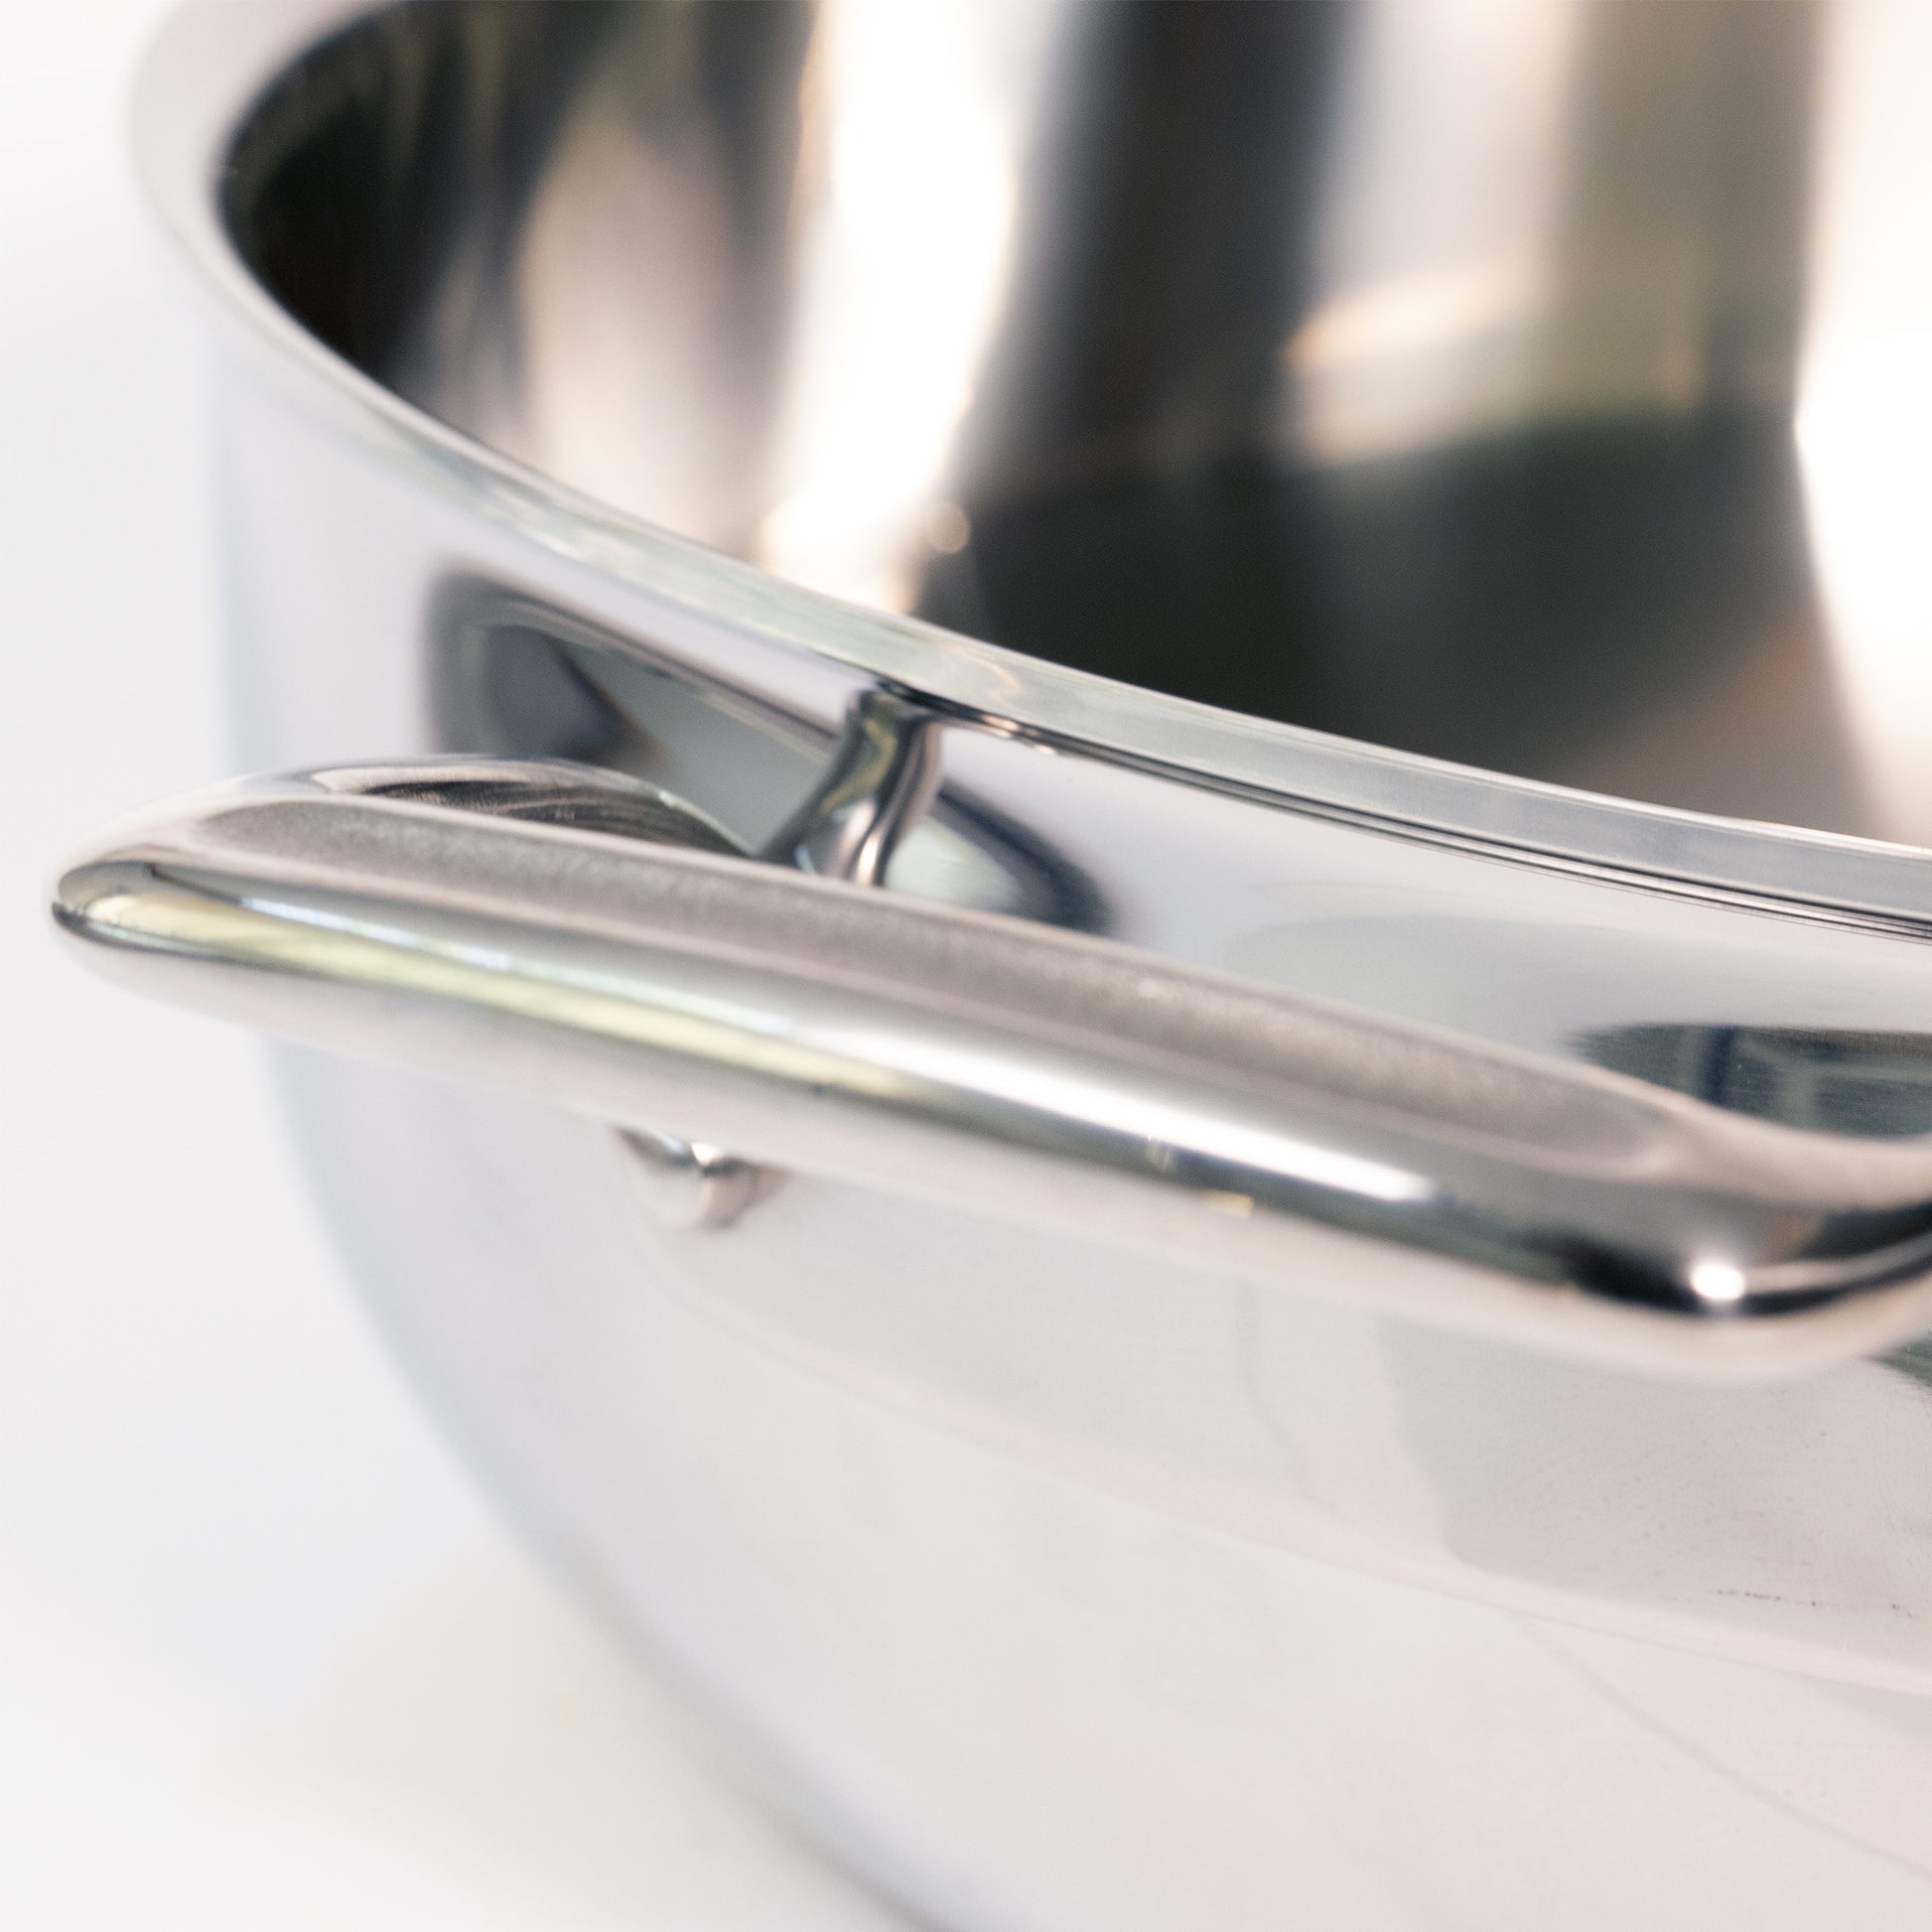 Hestan Induction Clad Stainless Steel Saucepan & Lid - 2 Sizes